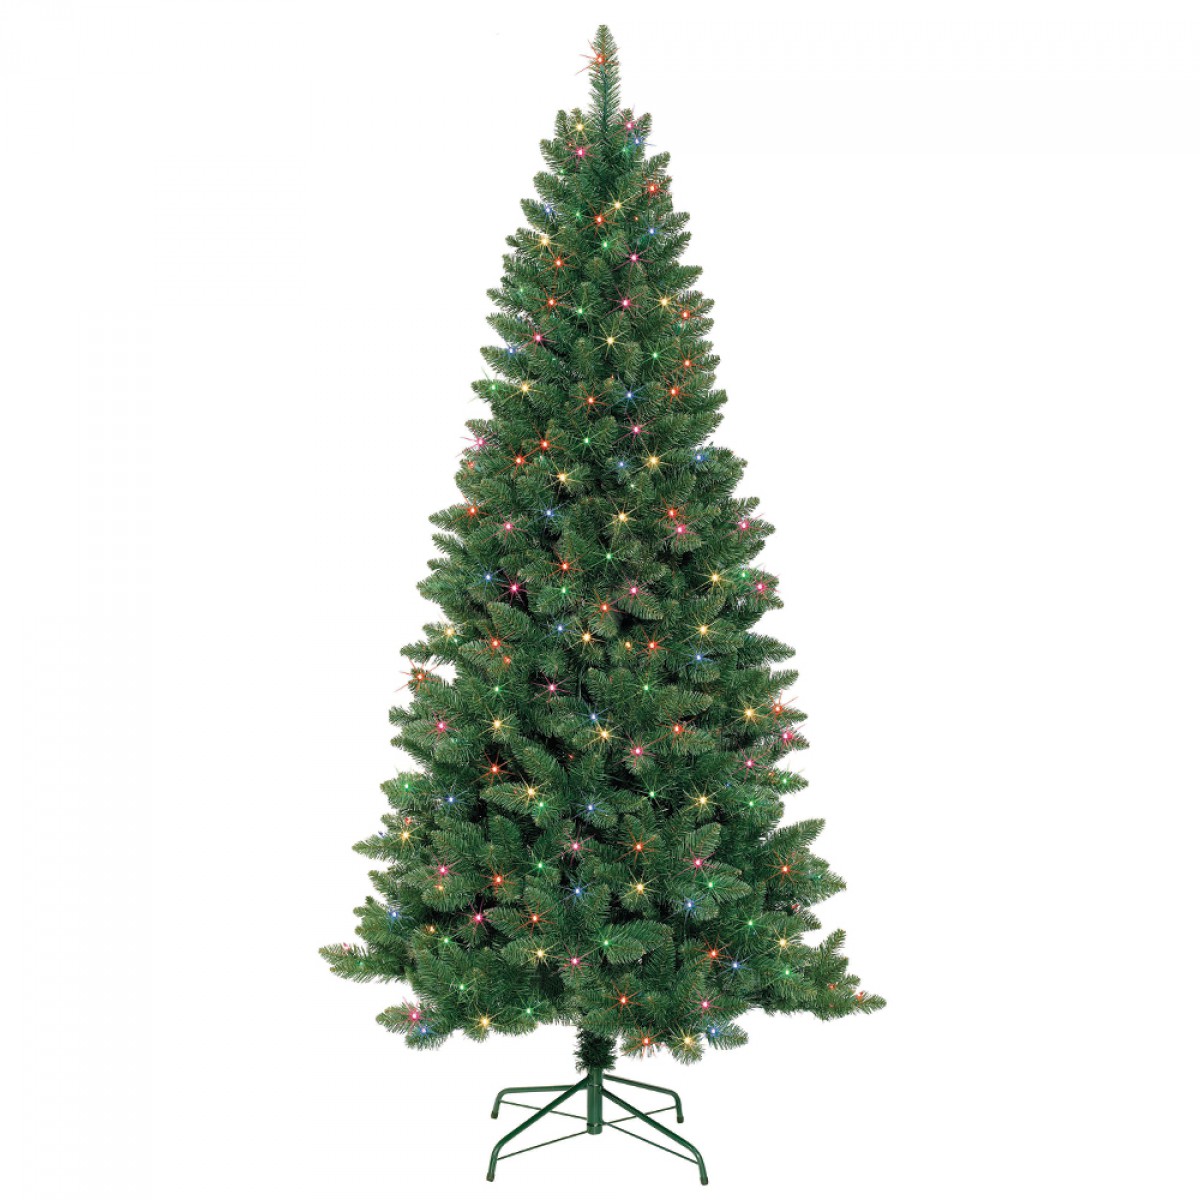 Home Accents Holiday 7-1/2 ft. Feel-Real Jersey Fraser Fir ...